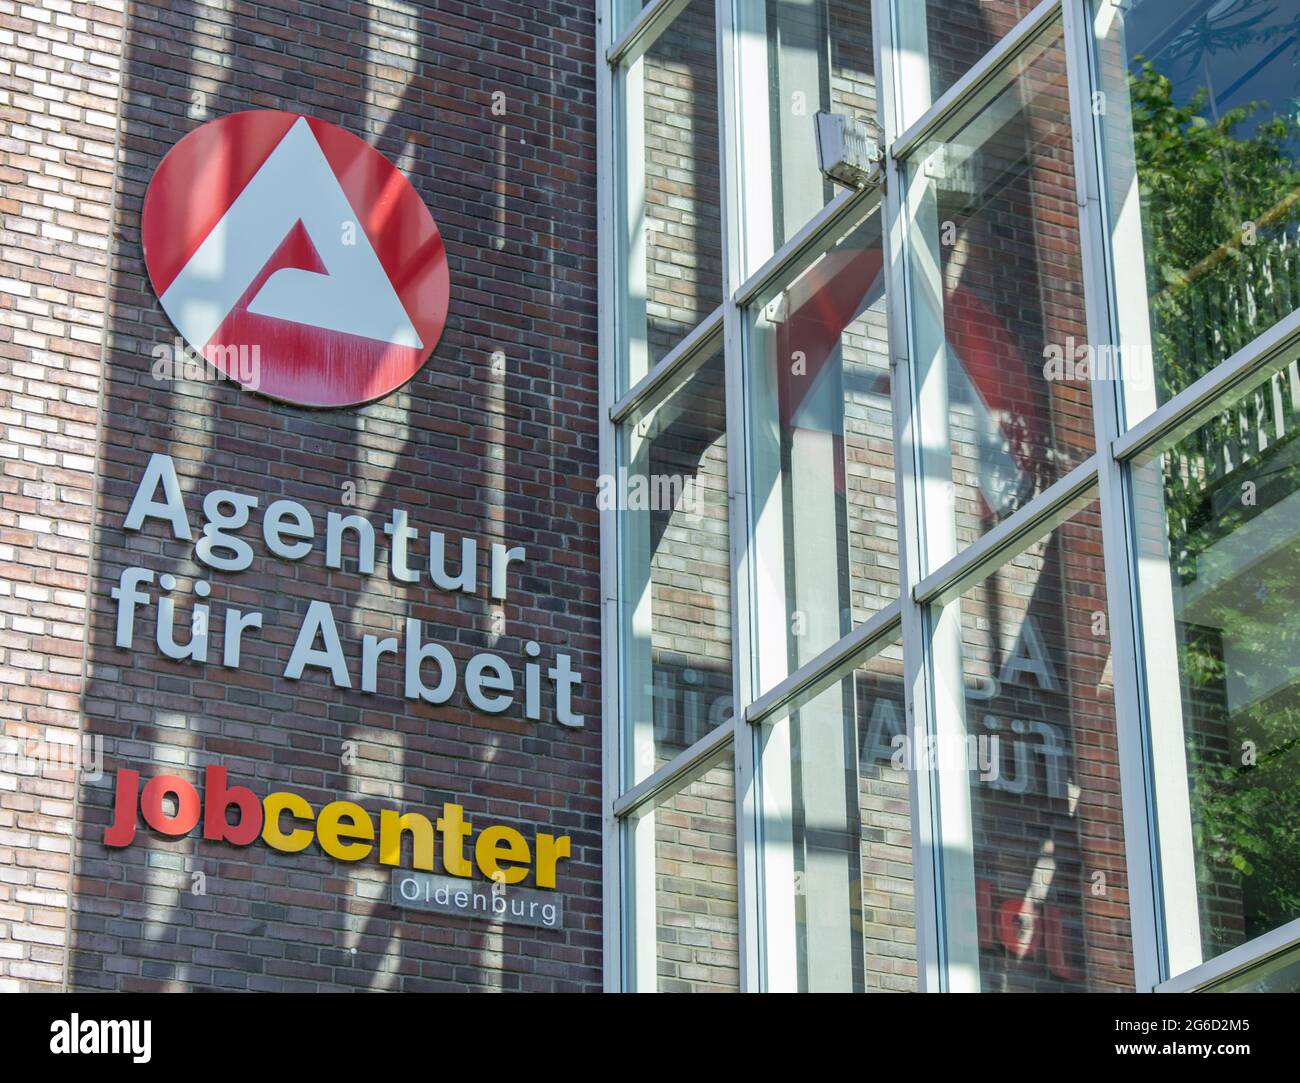 06.13.2021 Employment Agency And Job Center In Oldenburg, Lower Saxony. Stock Photo